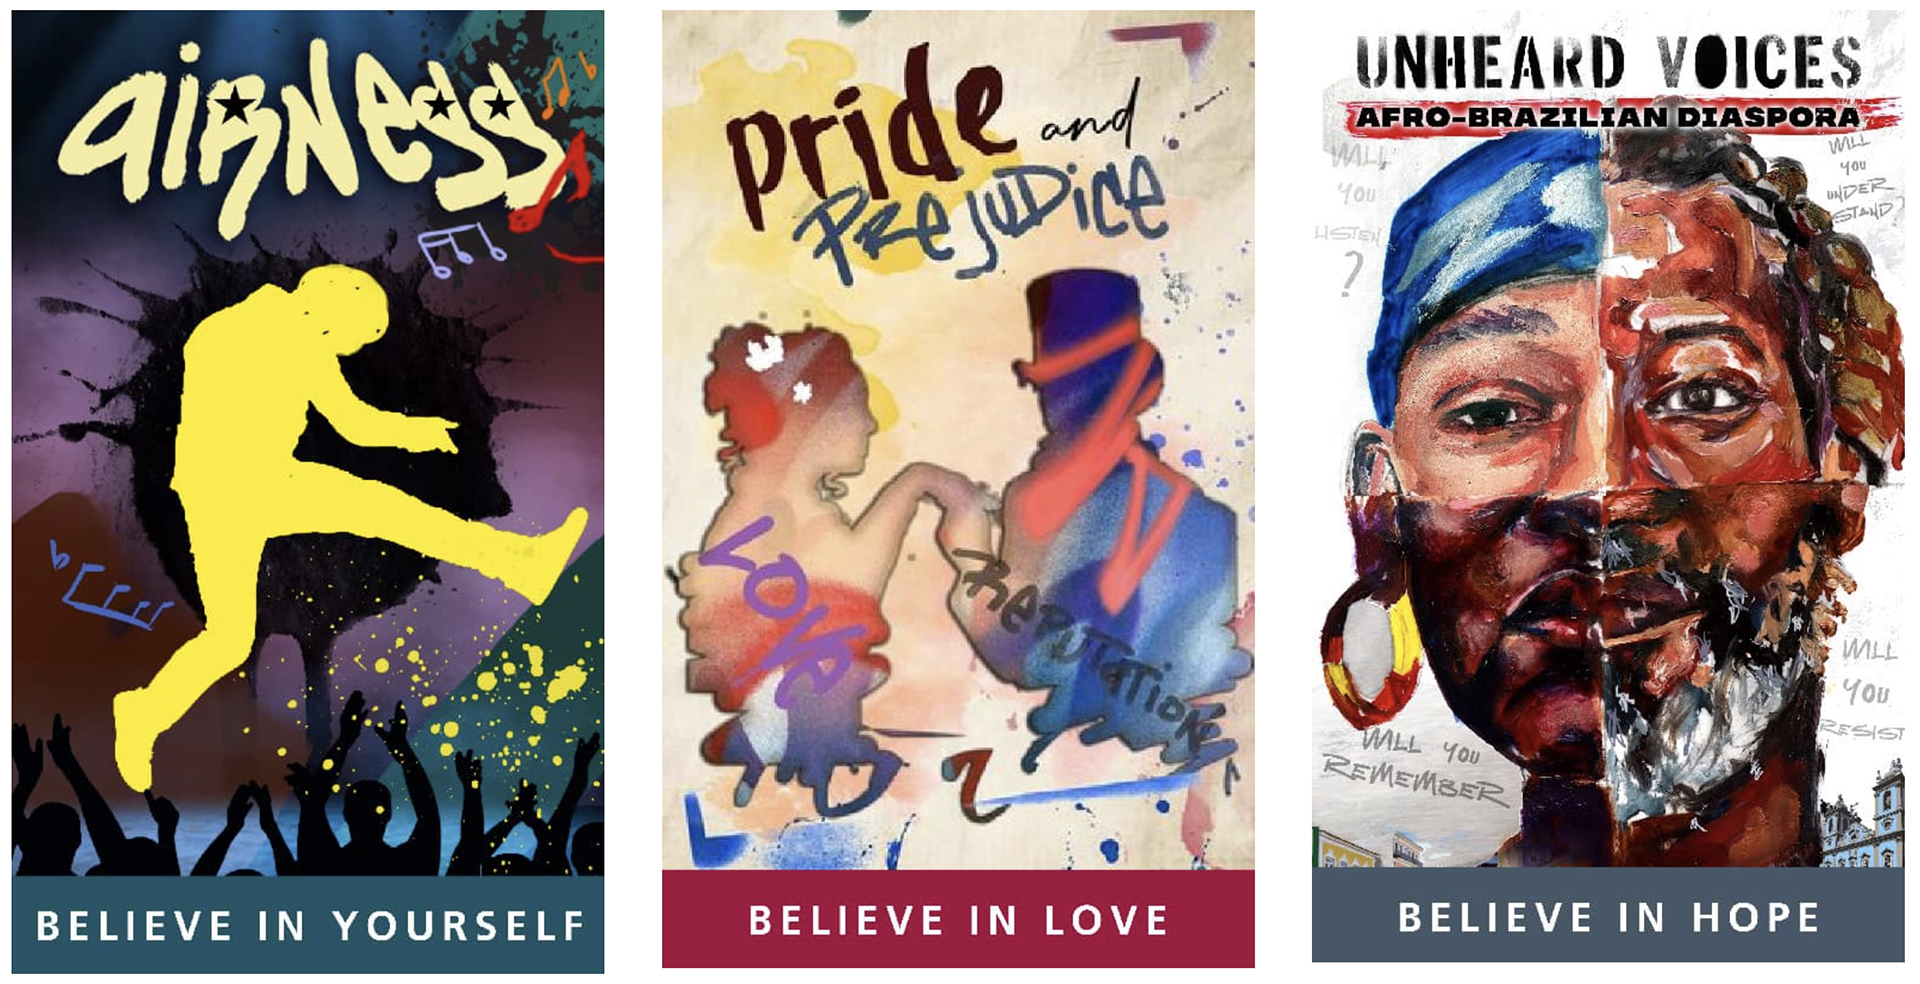 Artwork for three DMTC productions, including Airness, Believe in Yourself, Pride and Prejudice, Believe in Love and Unheard Voices, Afro-Brazilian Diaspora, Believe in Hope.